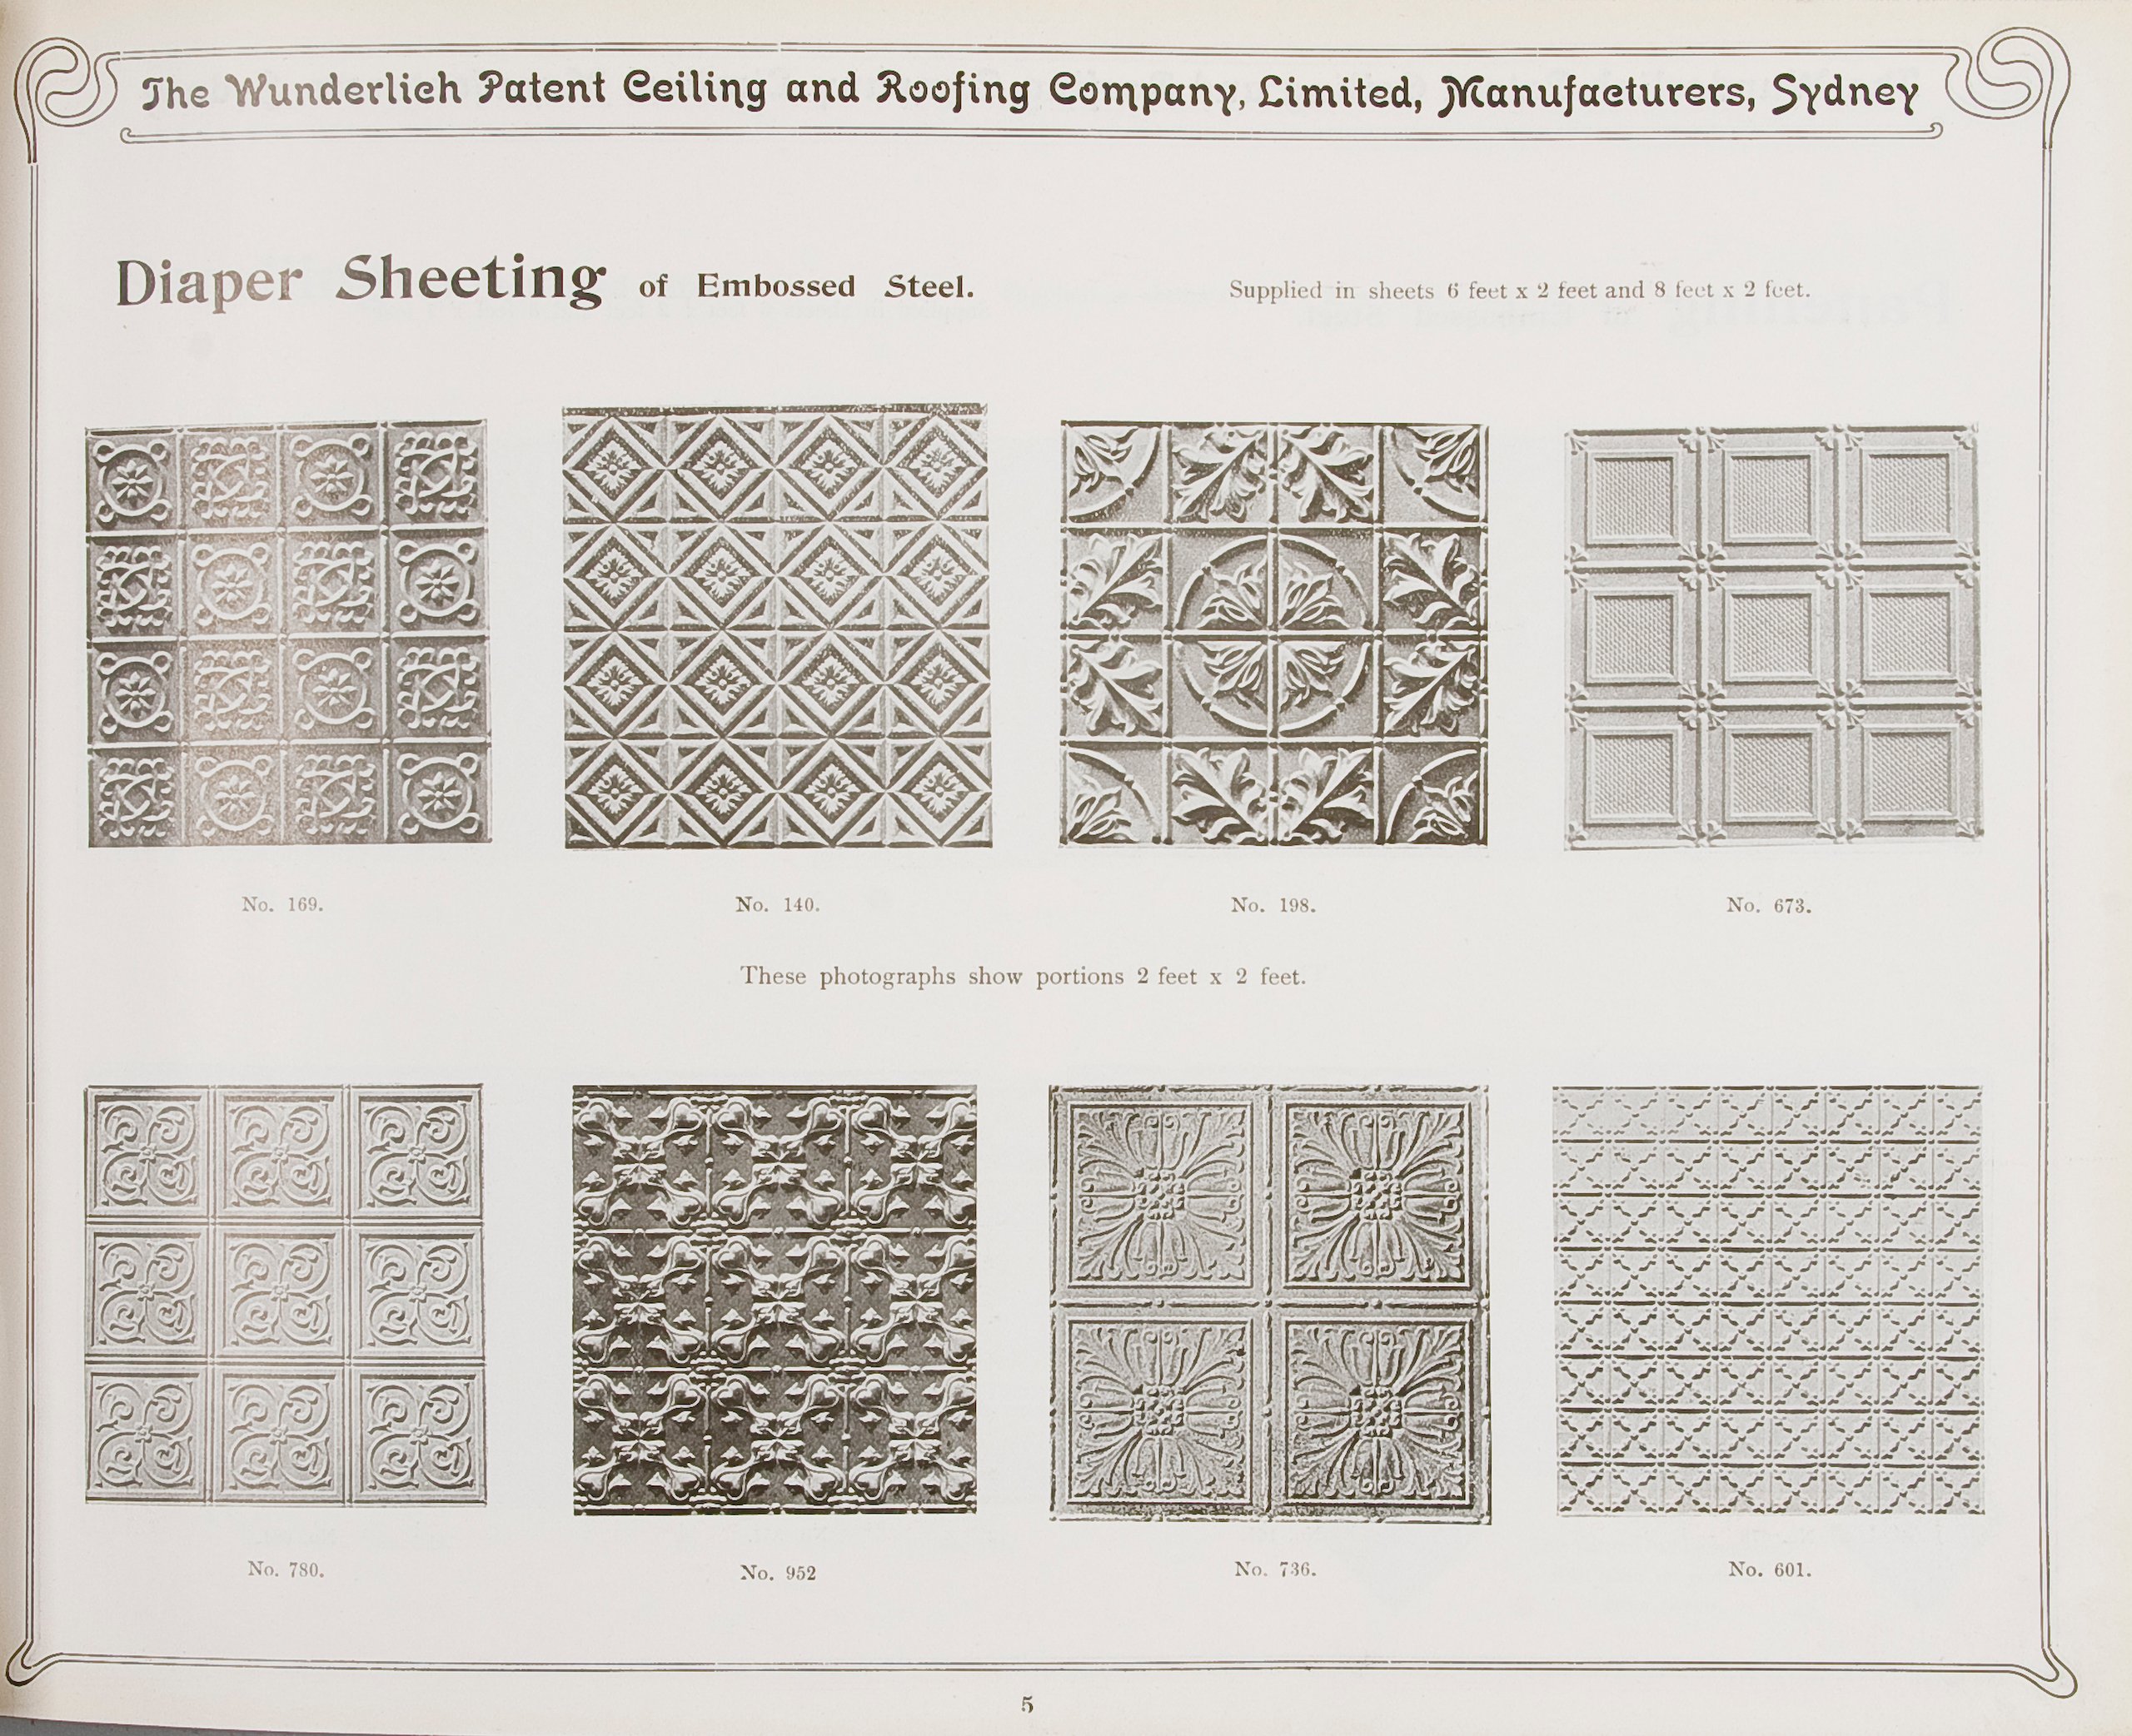 Page from abridged catalogue of Wunderlich 'Steel Ceiling Materials'